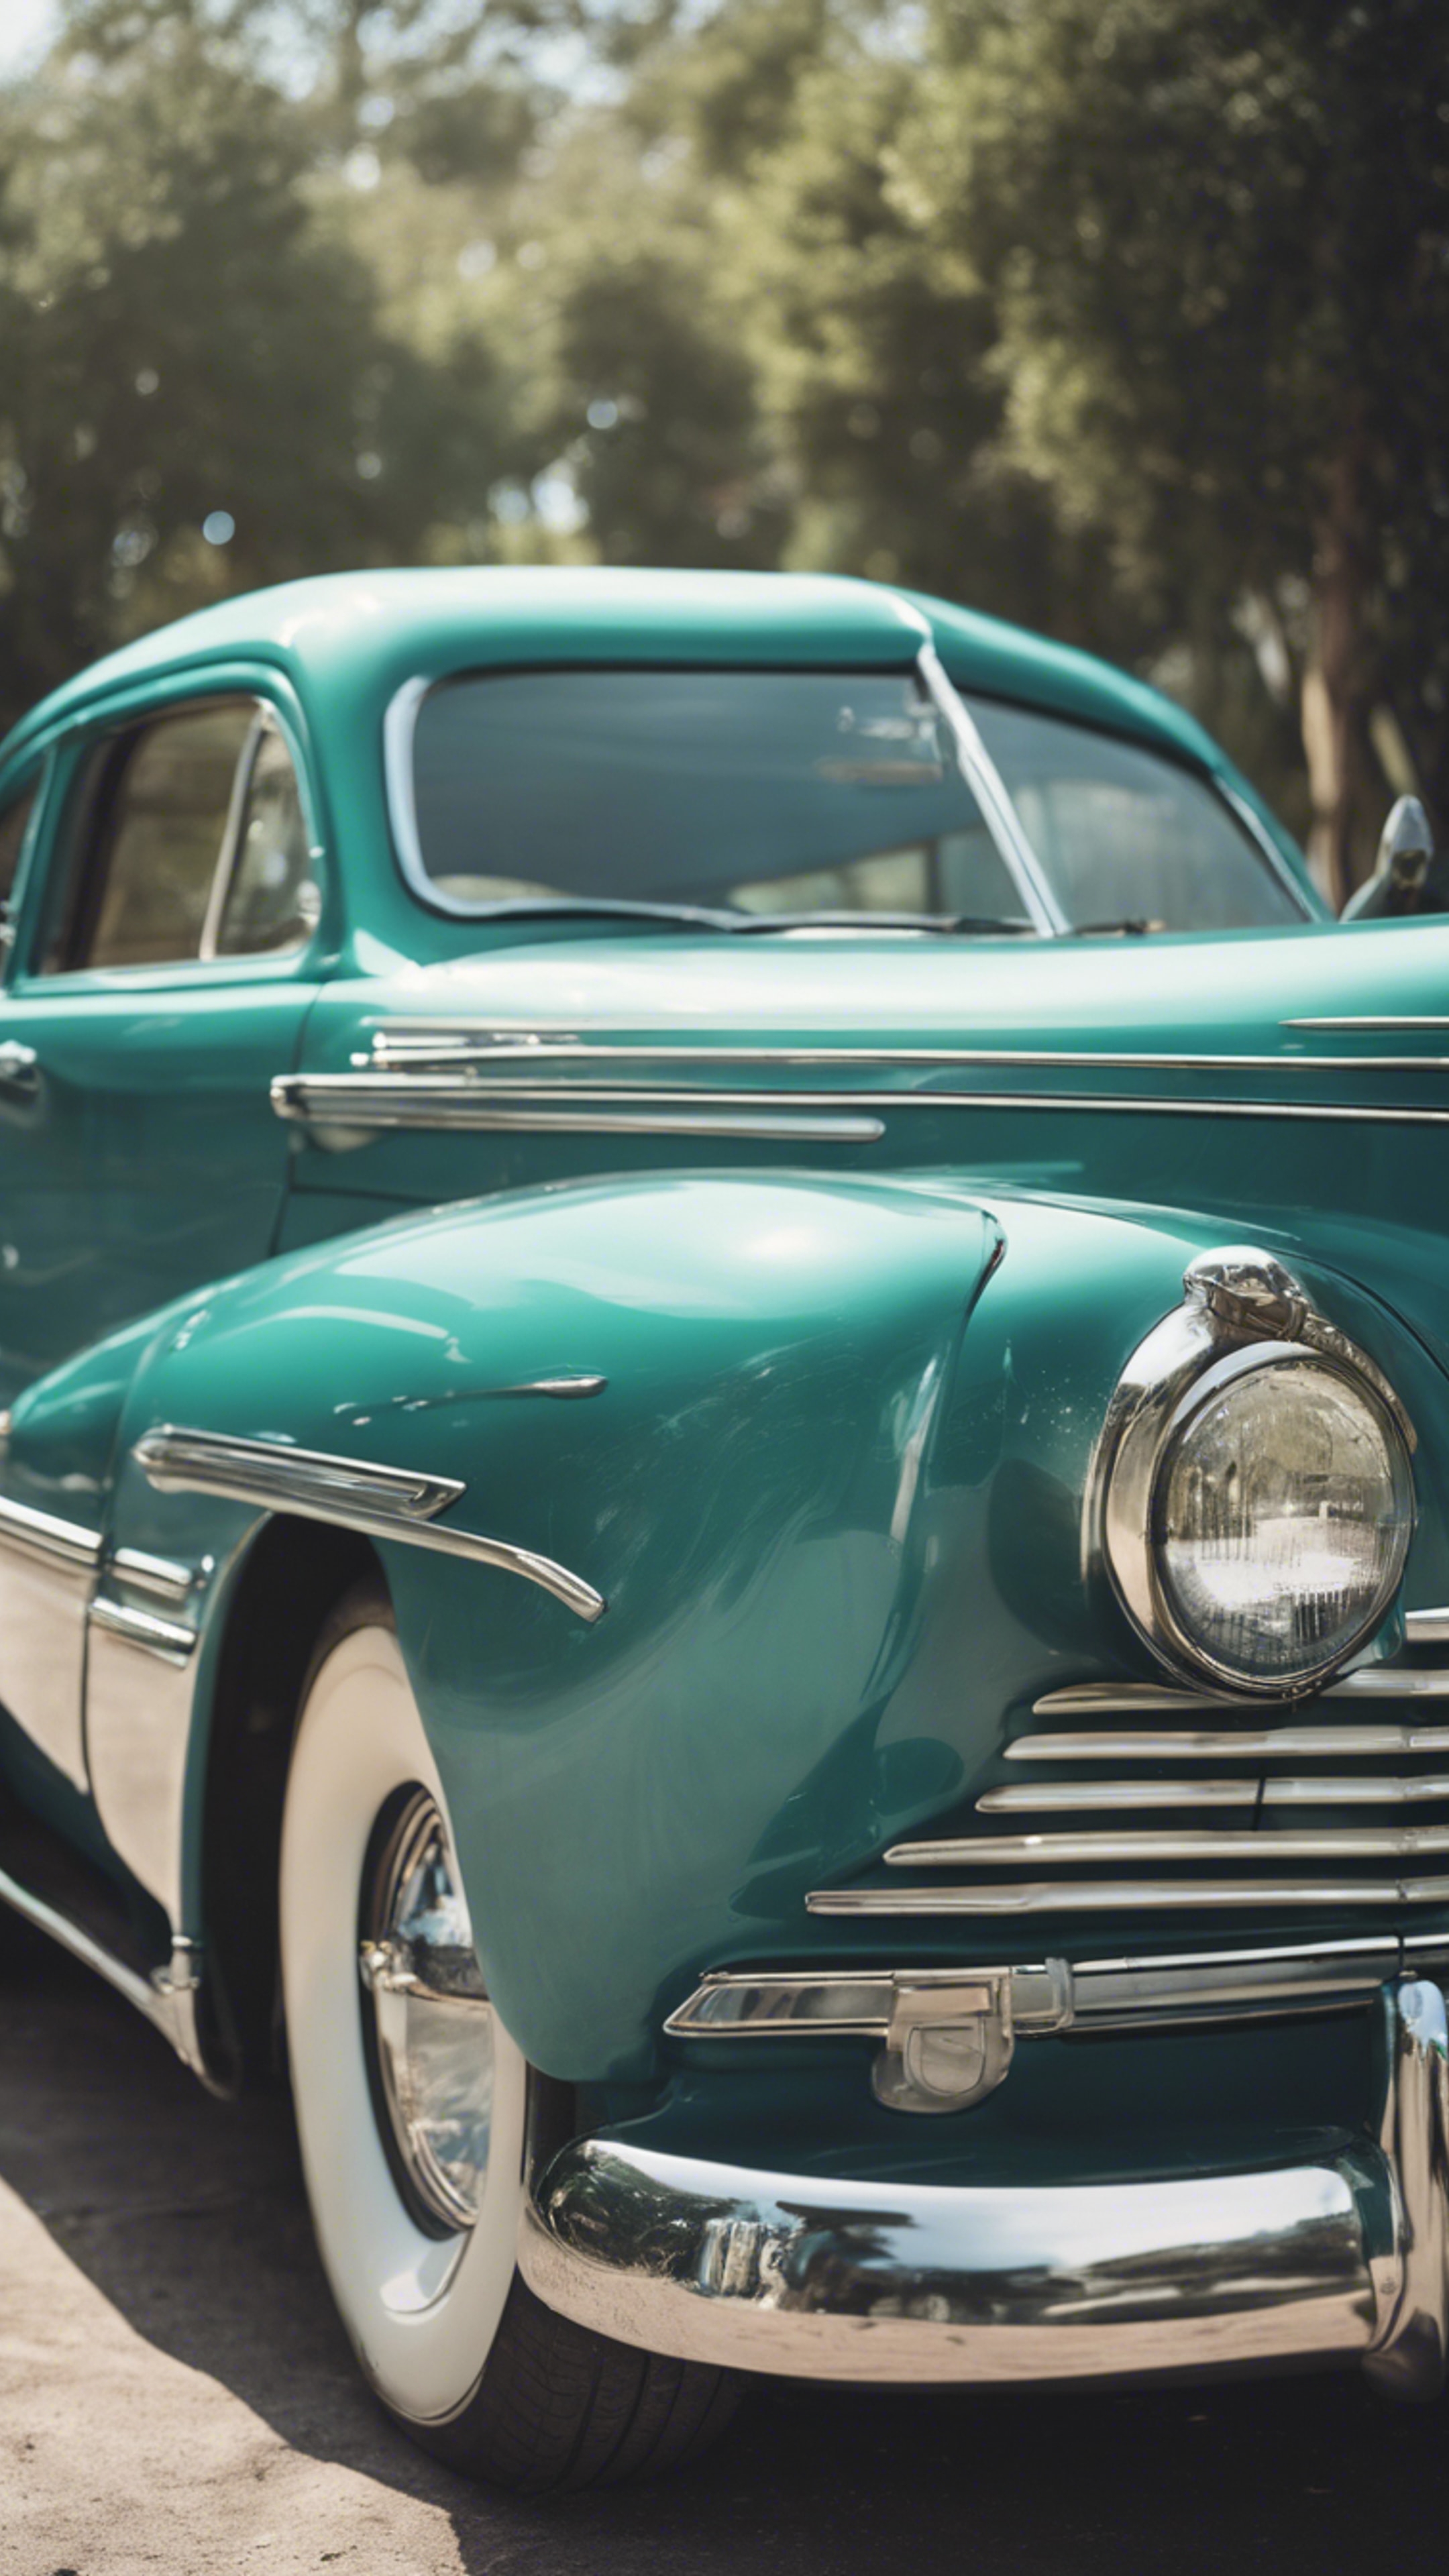 A vintage automobile polished in a cool teal color. Sfondo[a65c55f132fb459cb8fd]